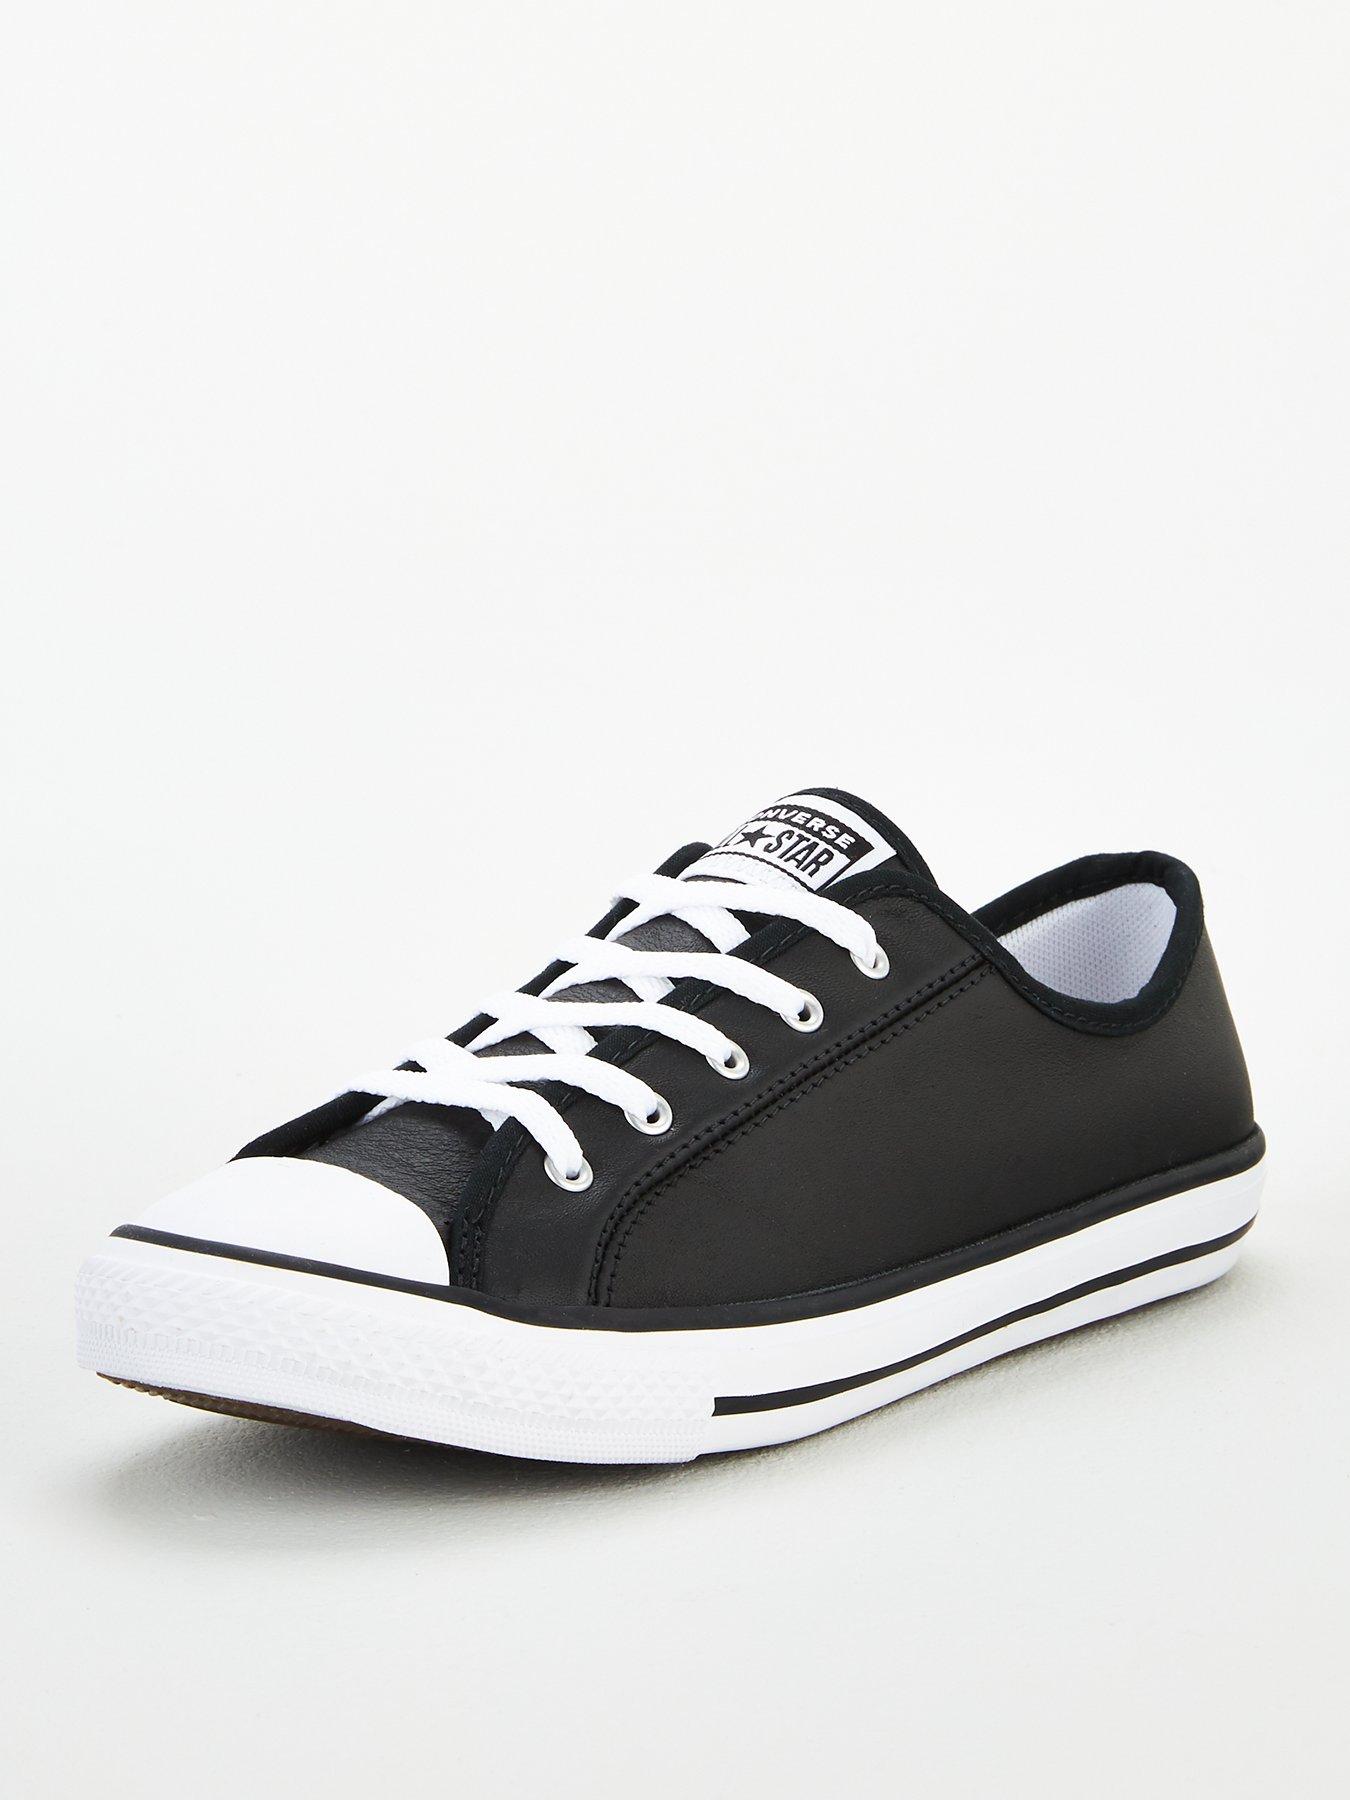 Converse Chuck Taylor All Star Leather Dainty - Black | littlewoods.com